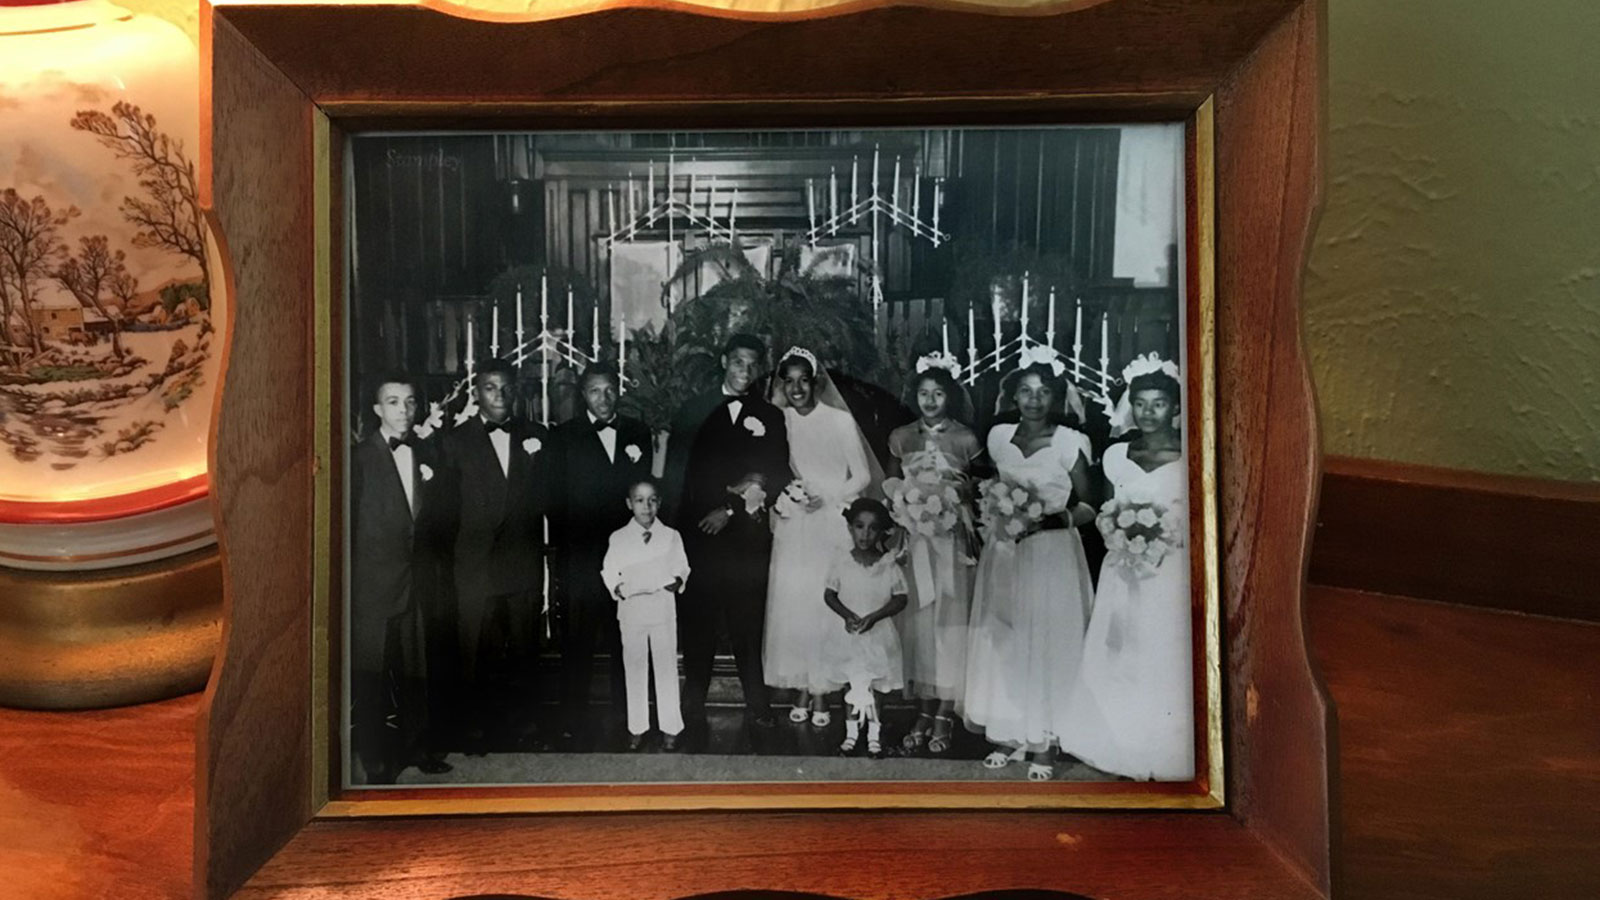 Image of a framed black and white photograph of the Evers family.